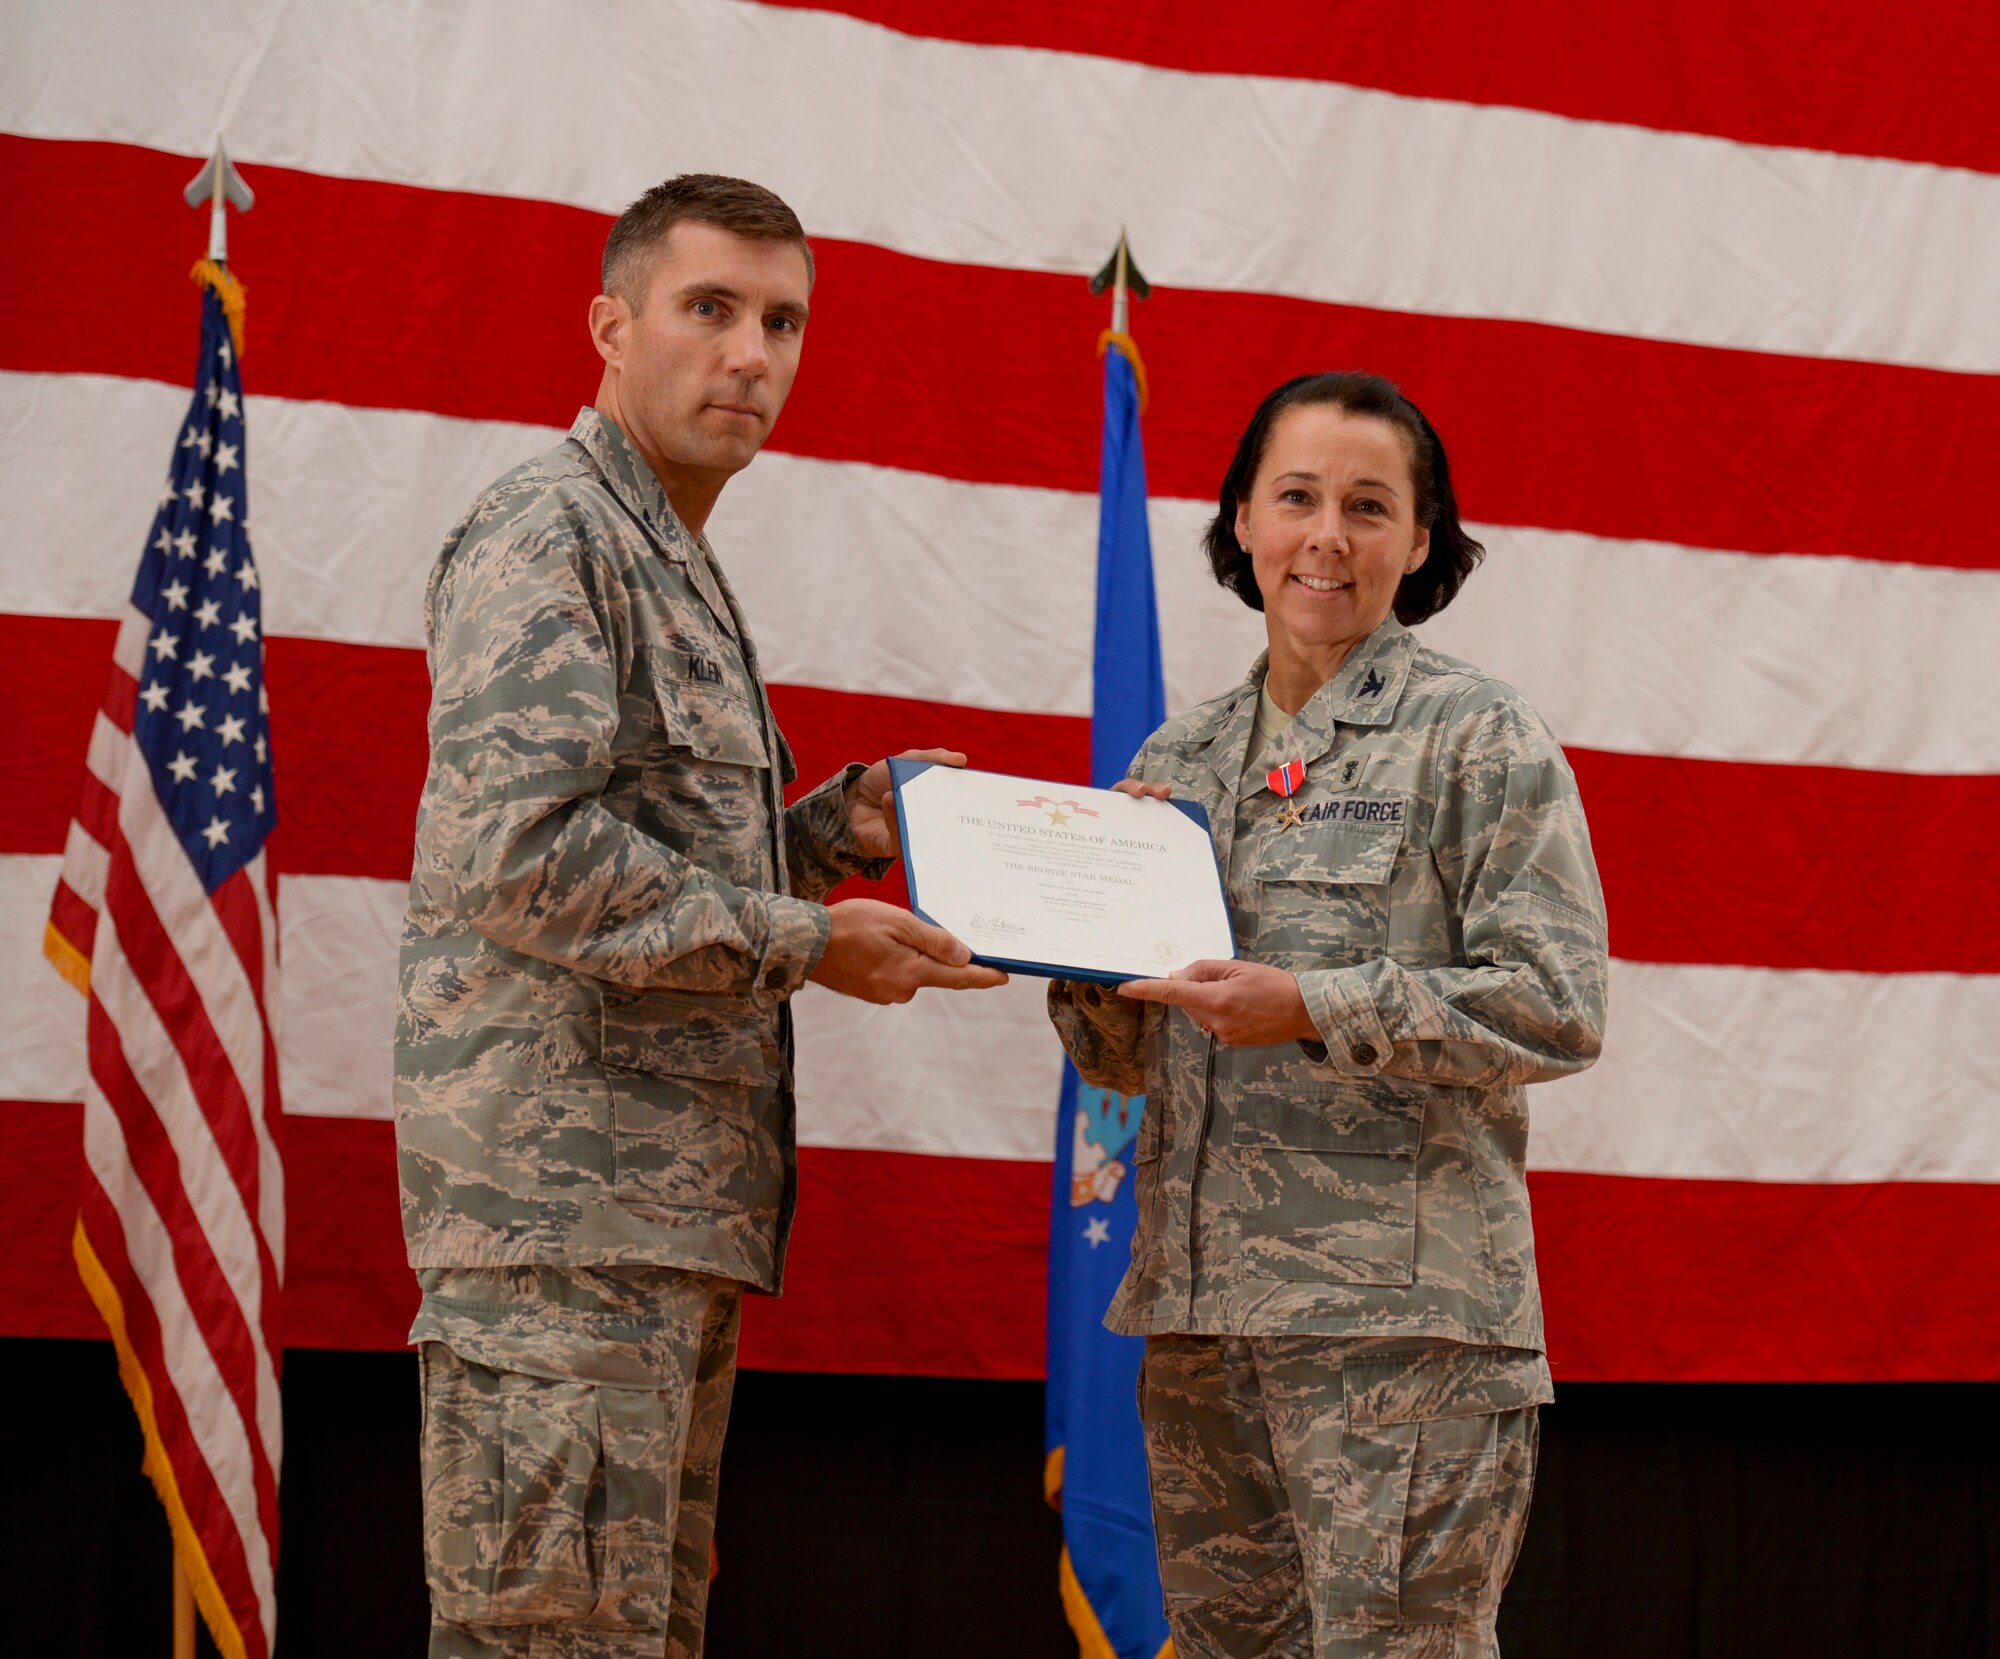 Col. Jeannine Ryder, 386th Expeditionary Medical Group commander, is presented with a Bronze Star medal by Col. John Klein, 386th Air Expeditionary Wing commander, June 8, 2014 during a change of command ceremony held at The Rock. Ryder was awarded the medal just before relinquishing command of the 386th EMDG to Col. Susan Davis. (U.S. Air Force photo by Staff Sgt. Jeremy Bowcock)